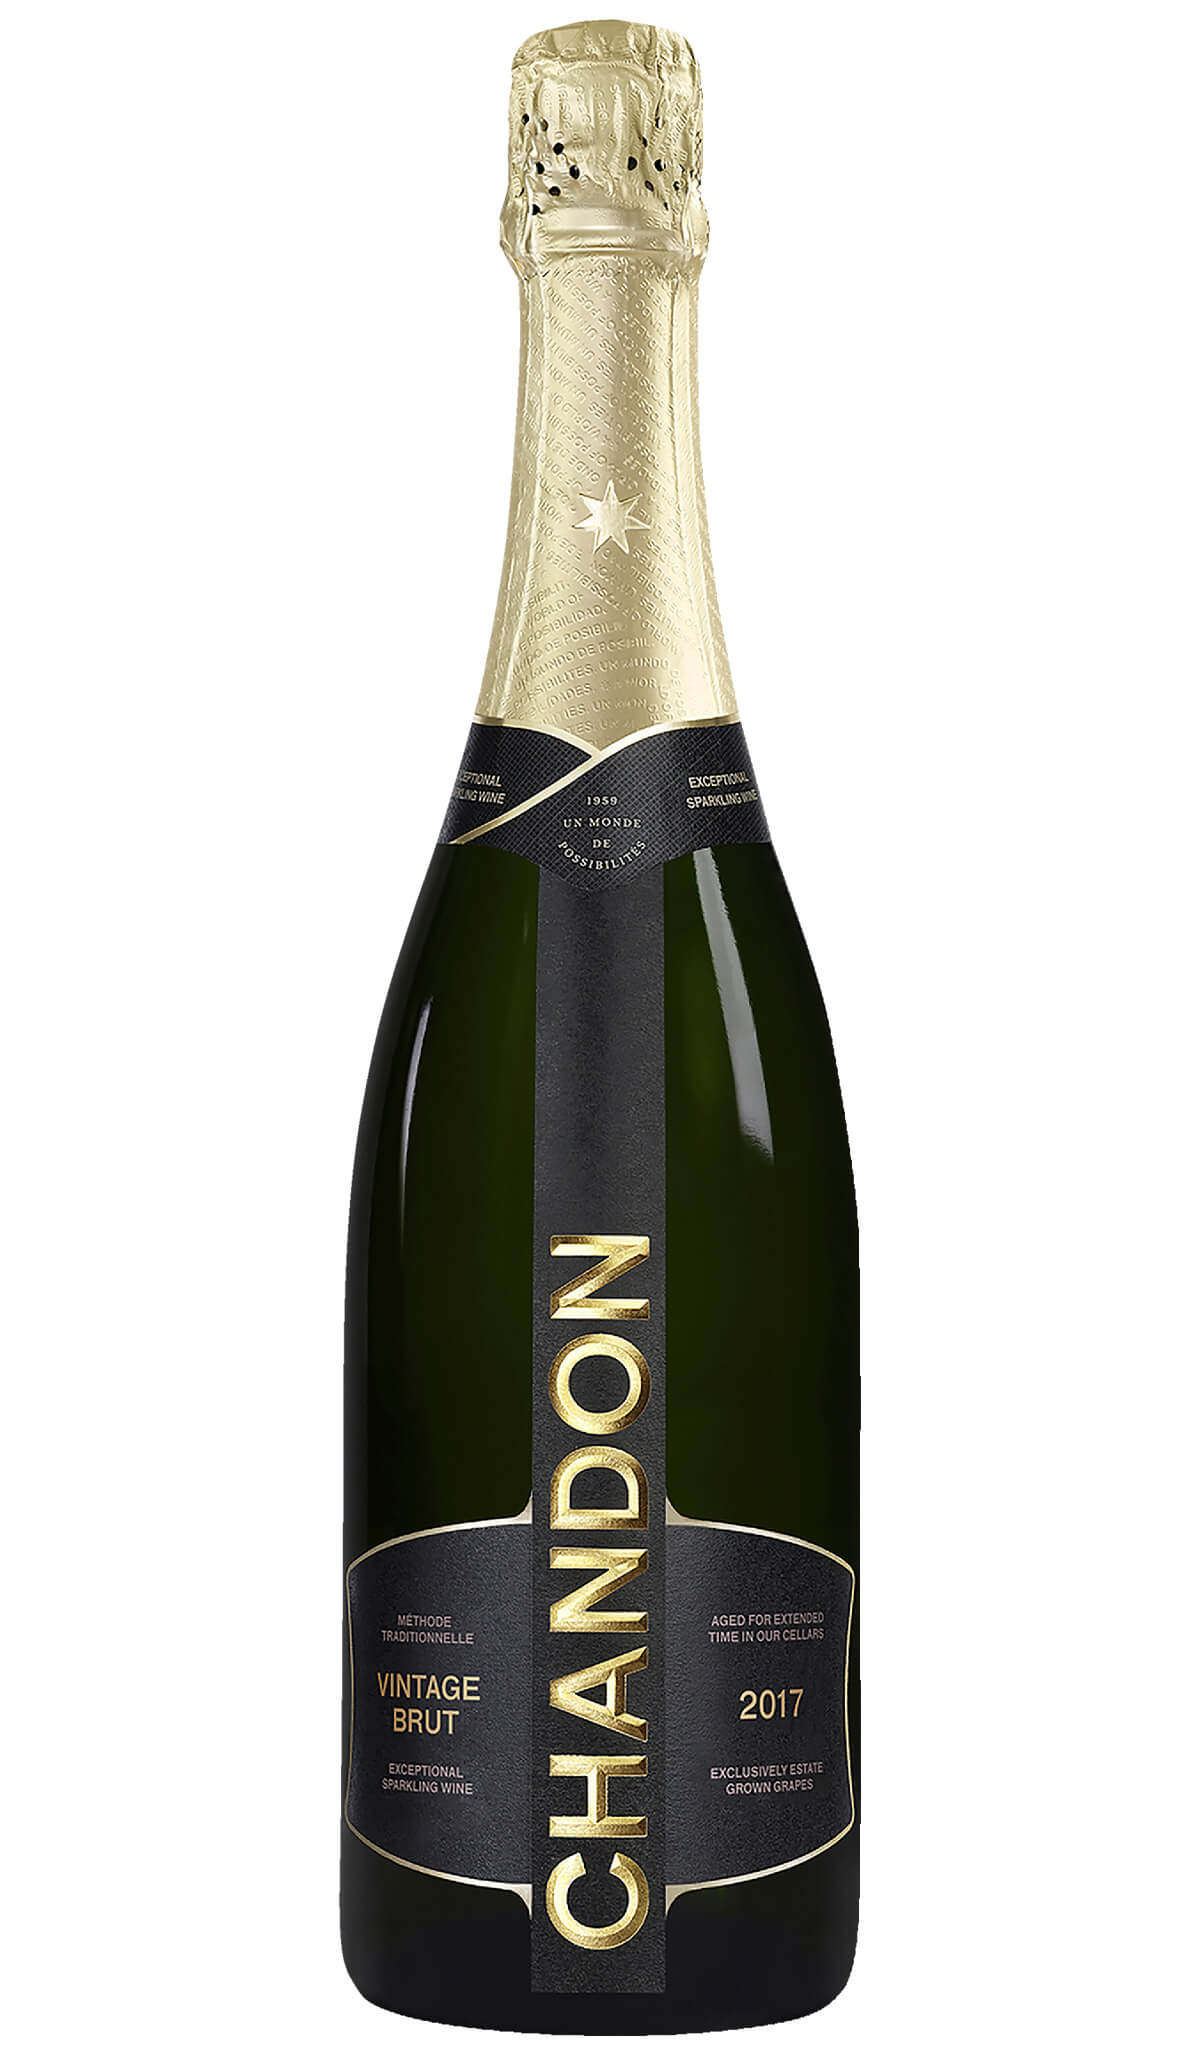 Find out more, explore the range and purchase Chandon Vintage Sparkling Brut 2017 available online at Wine Sellers Direct - Australia's independent liquor specialists.